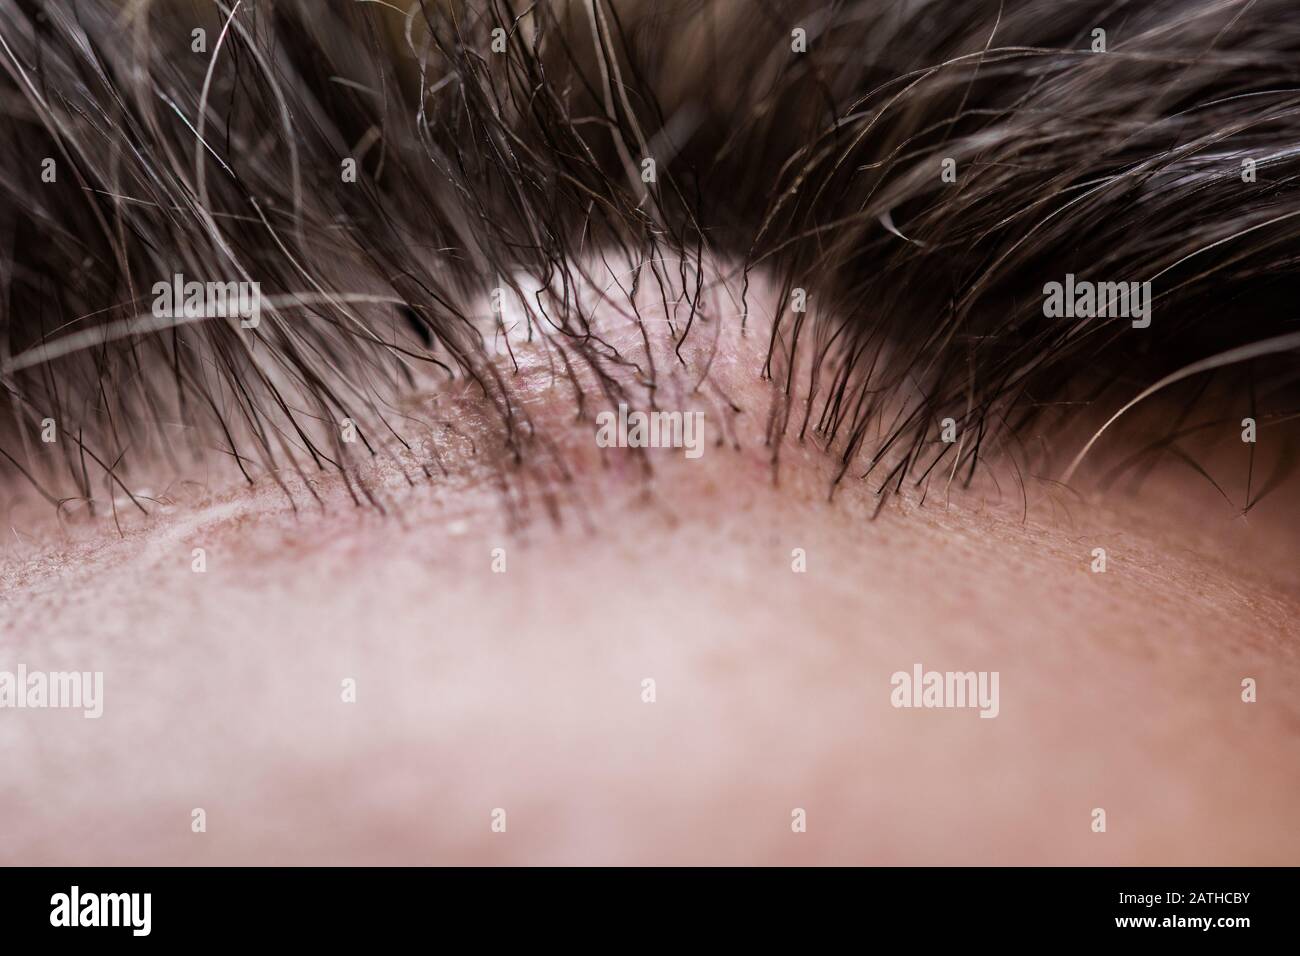 Closeup of a male head with an atheroma or lipom Stock Photo